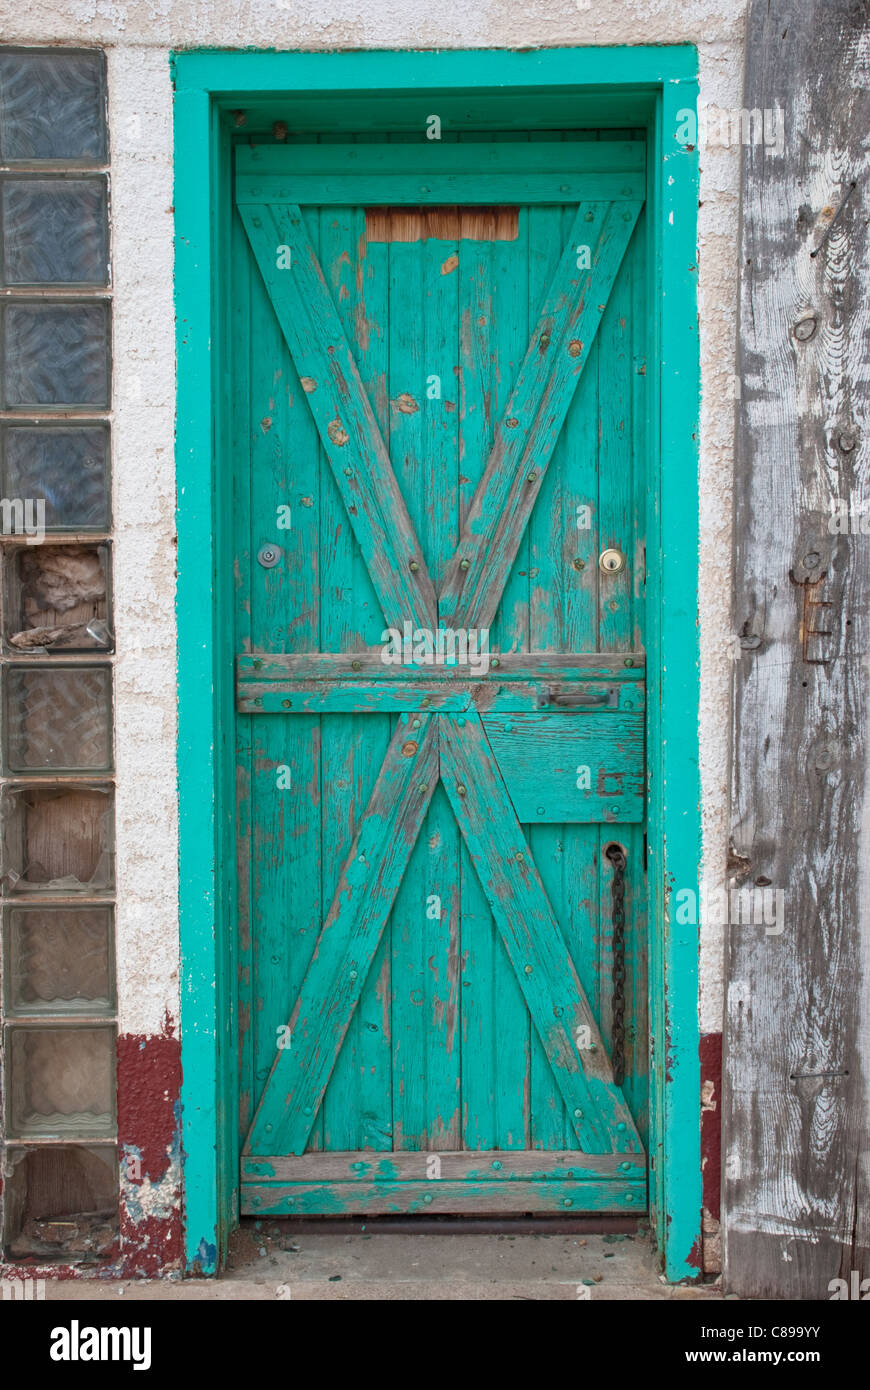 An old green door conceals unknown property in an abandoned building in Ft. Sumner, New Mexico. Stock Photo